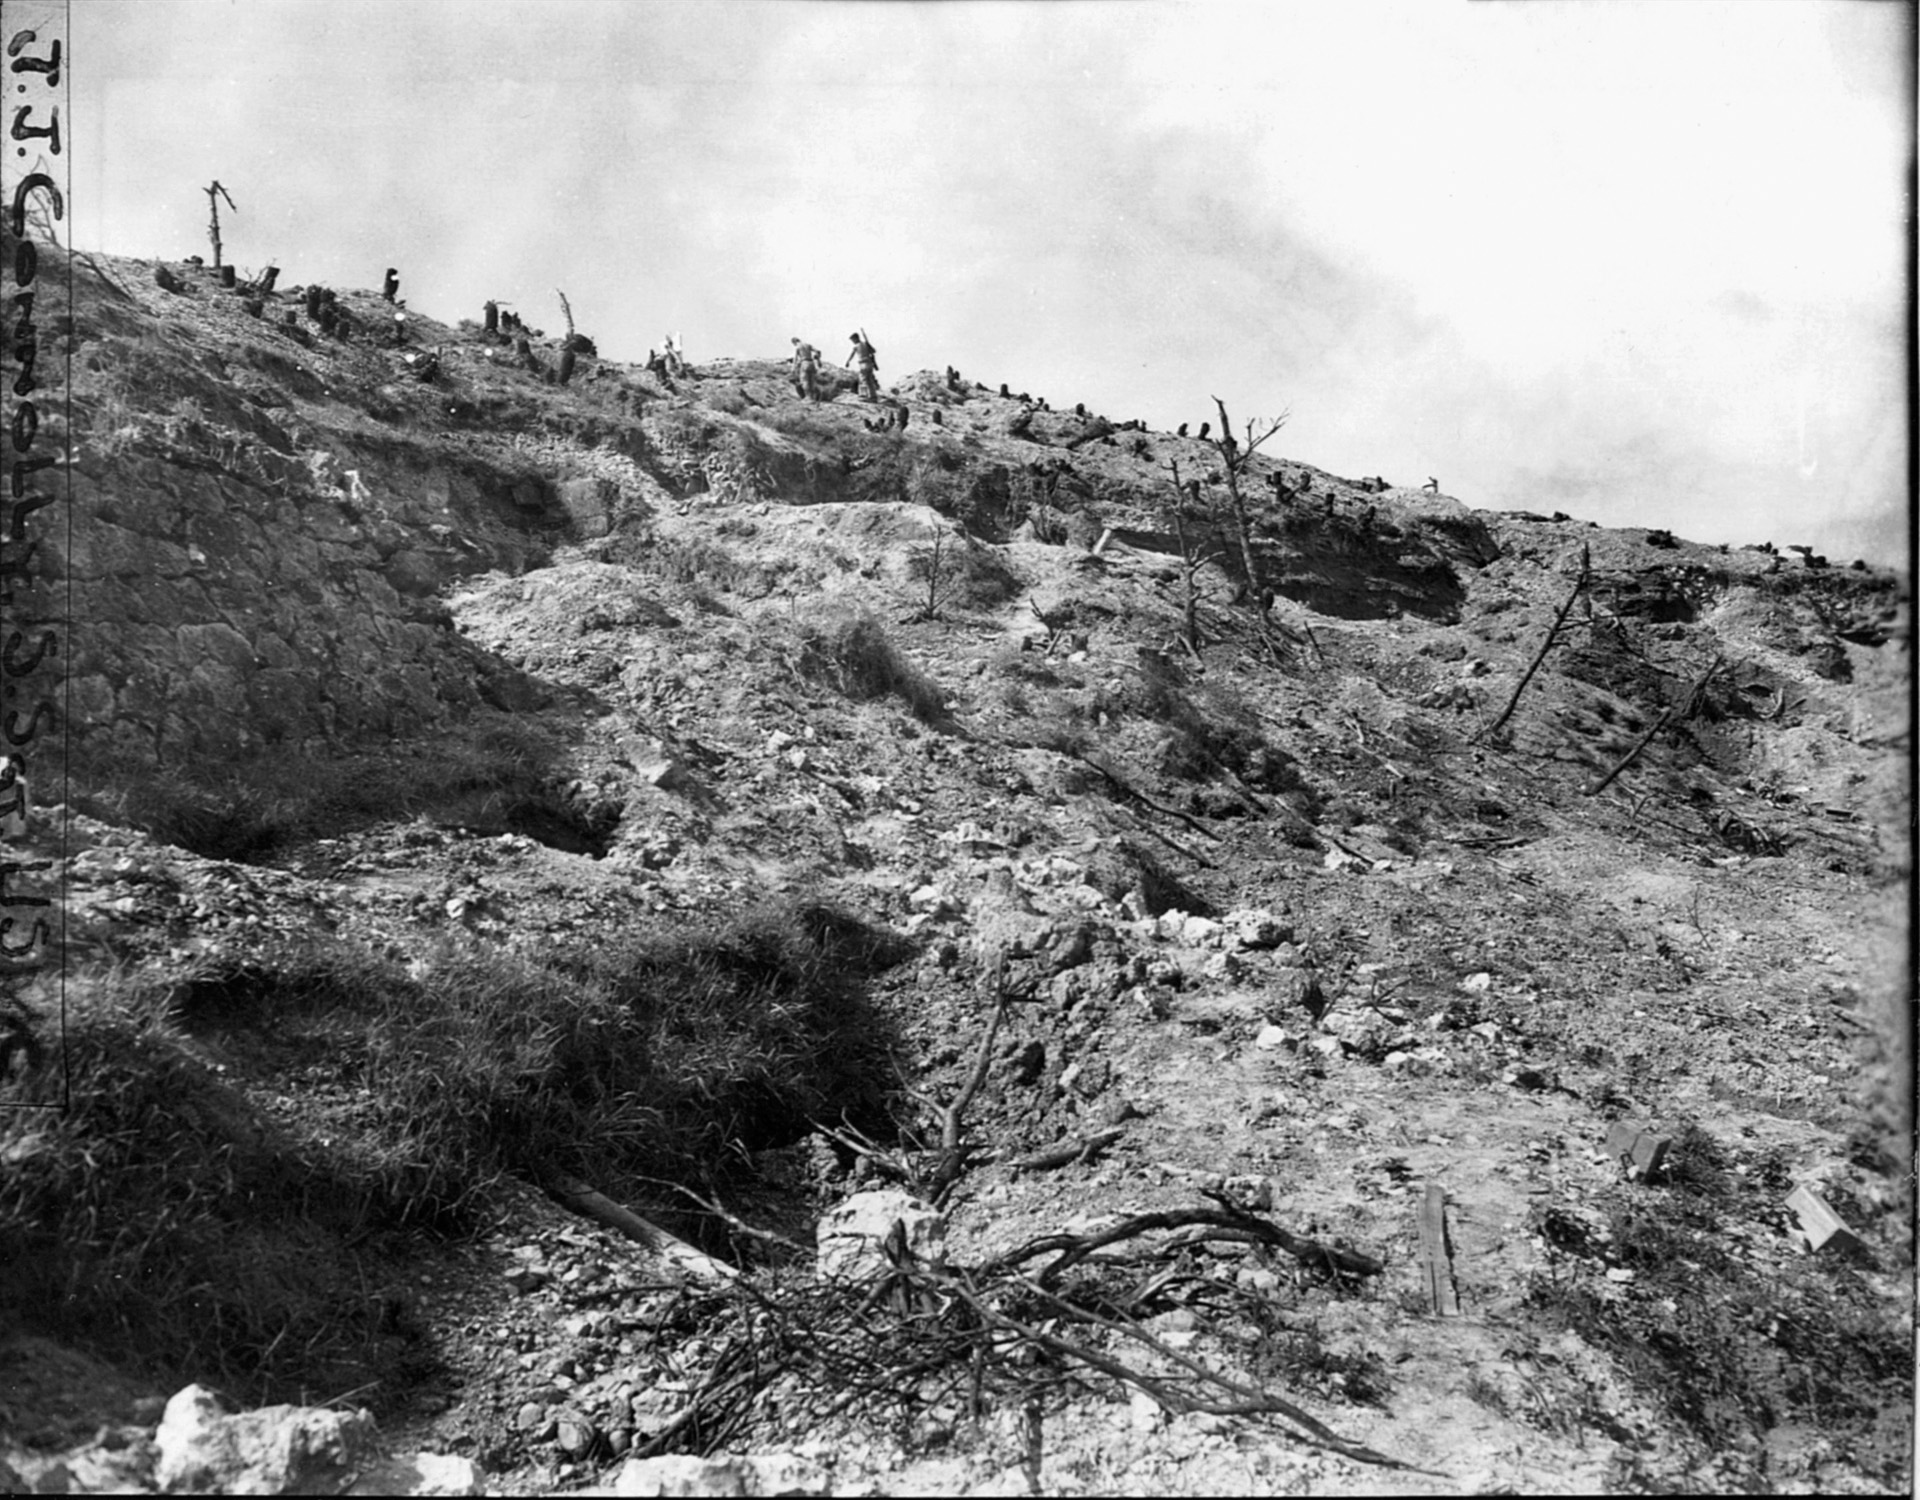 Battle weary Marines slowly ascend Sugar Loaf Hill after its capture.